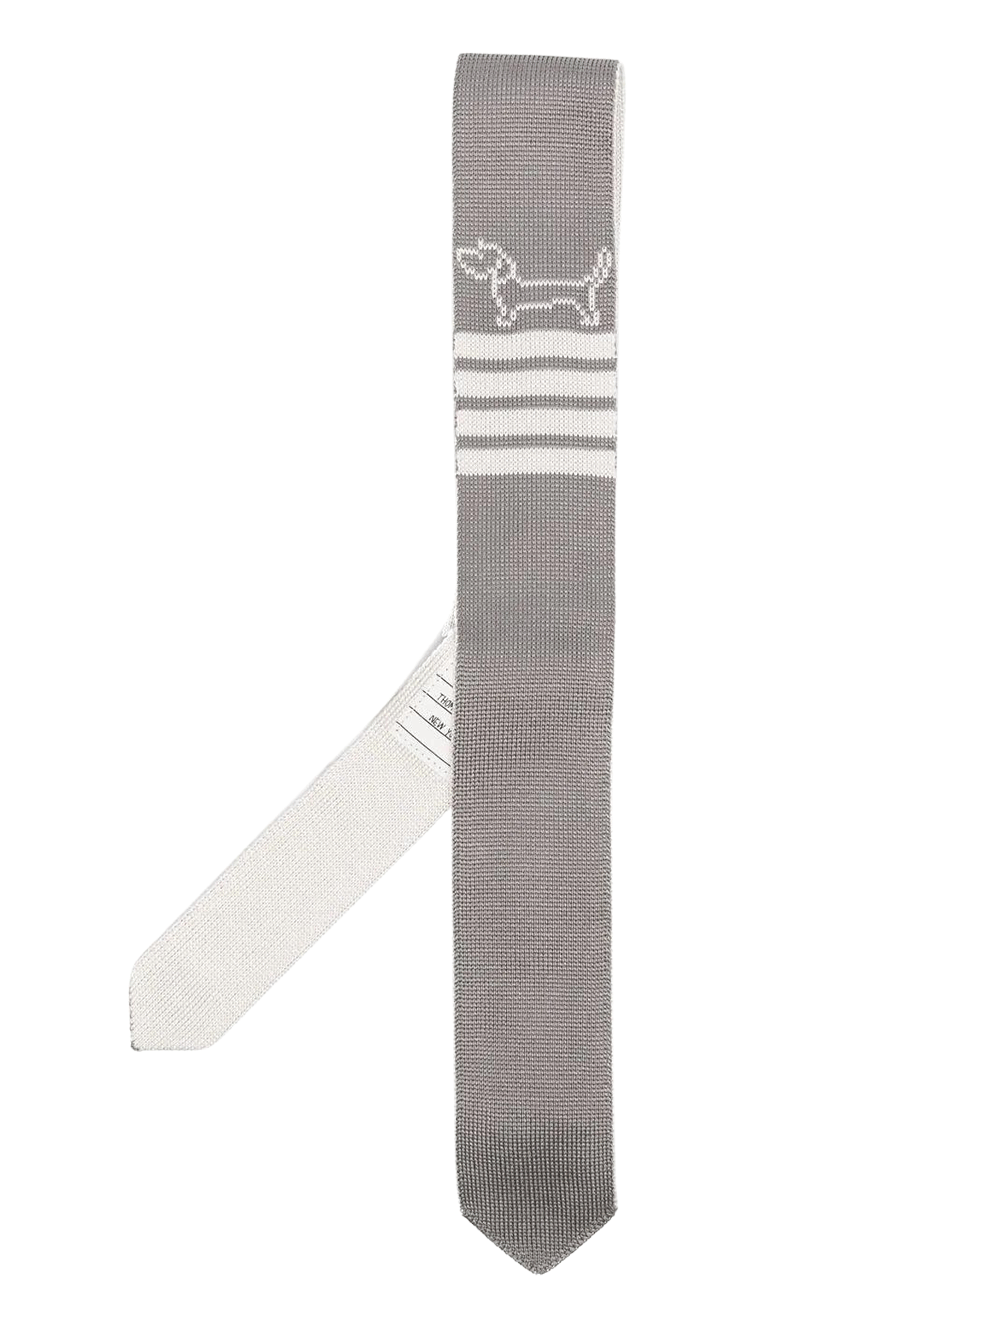 Thom-Browne-Hector-Icon-Double-Face-Jacquard-Tie-Light-Grey-1